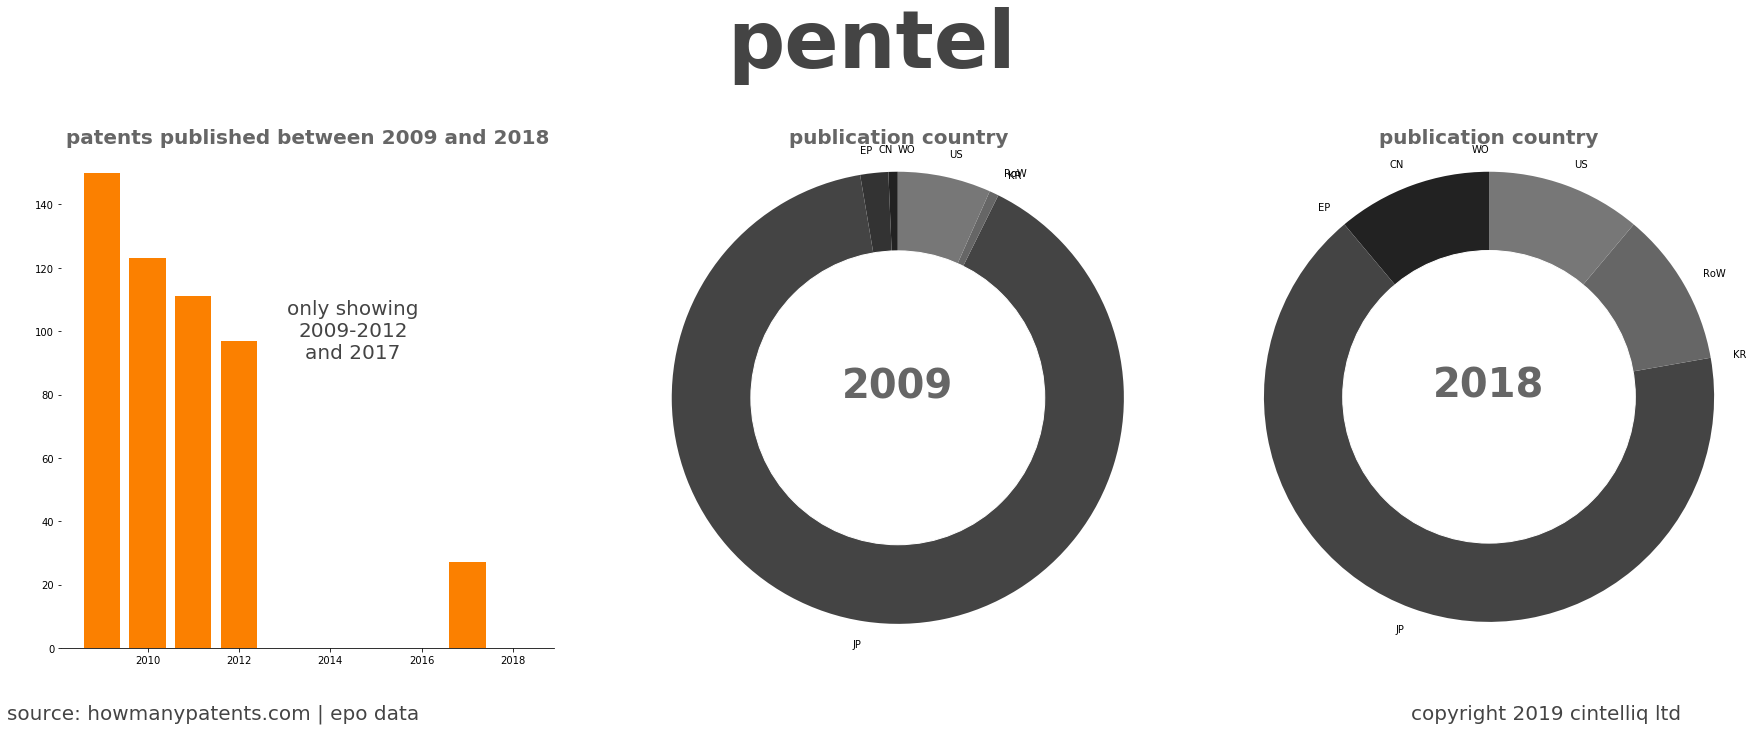 summary of patents for Pentel